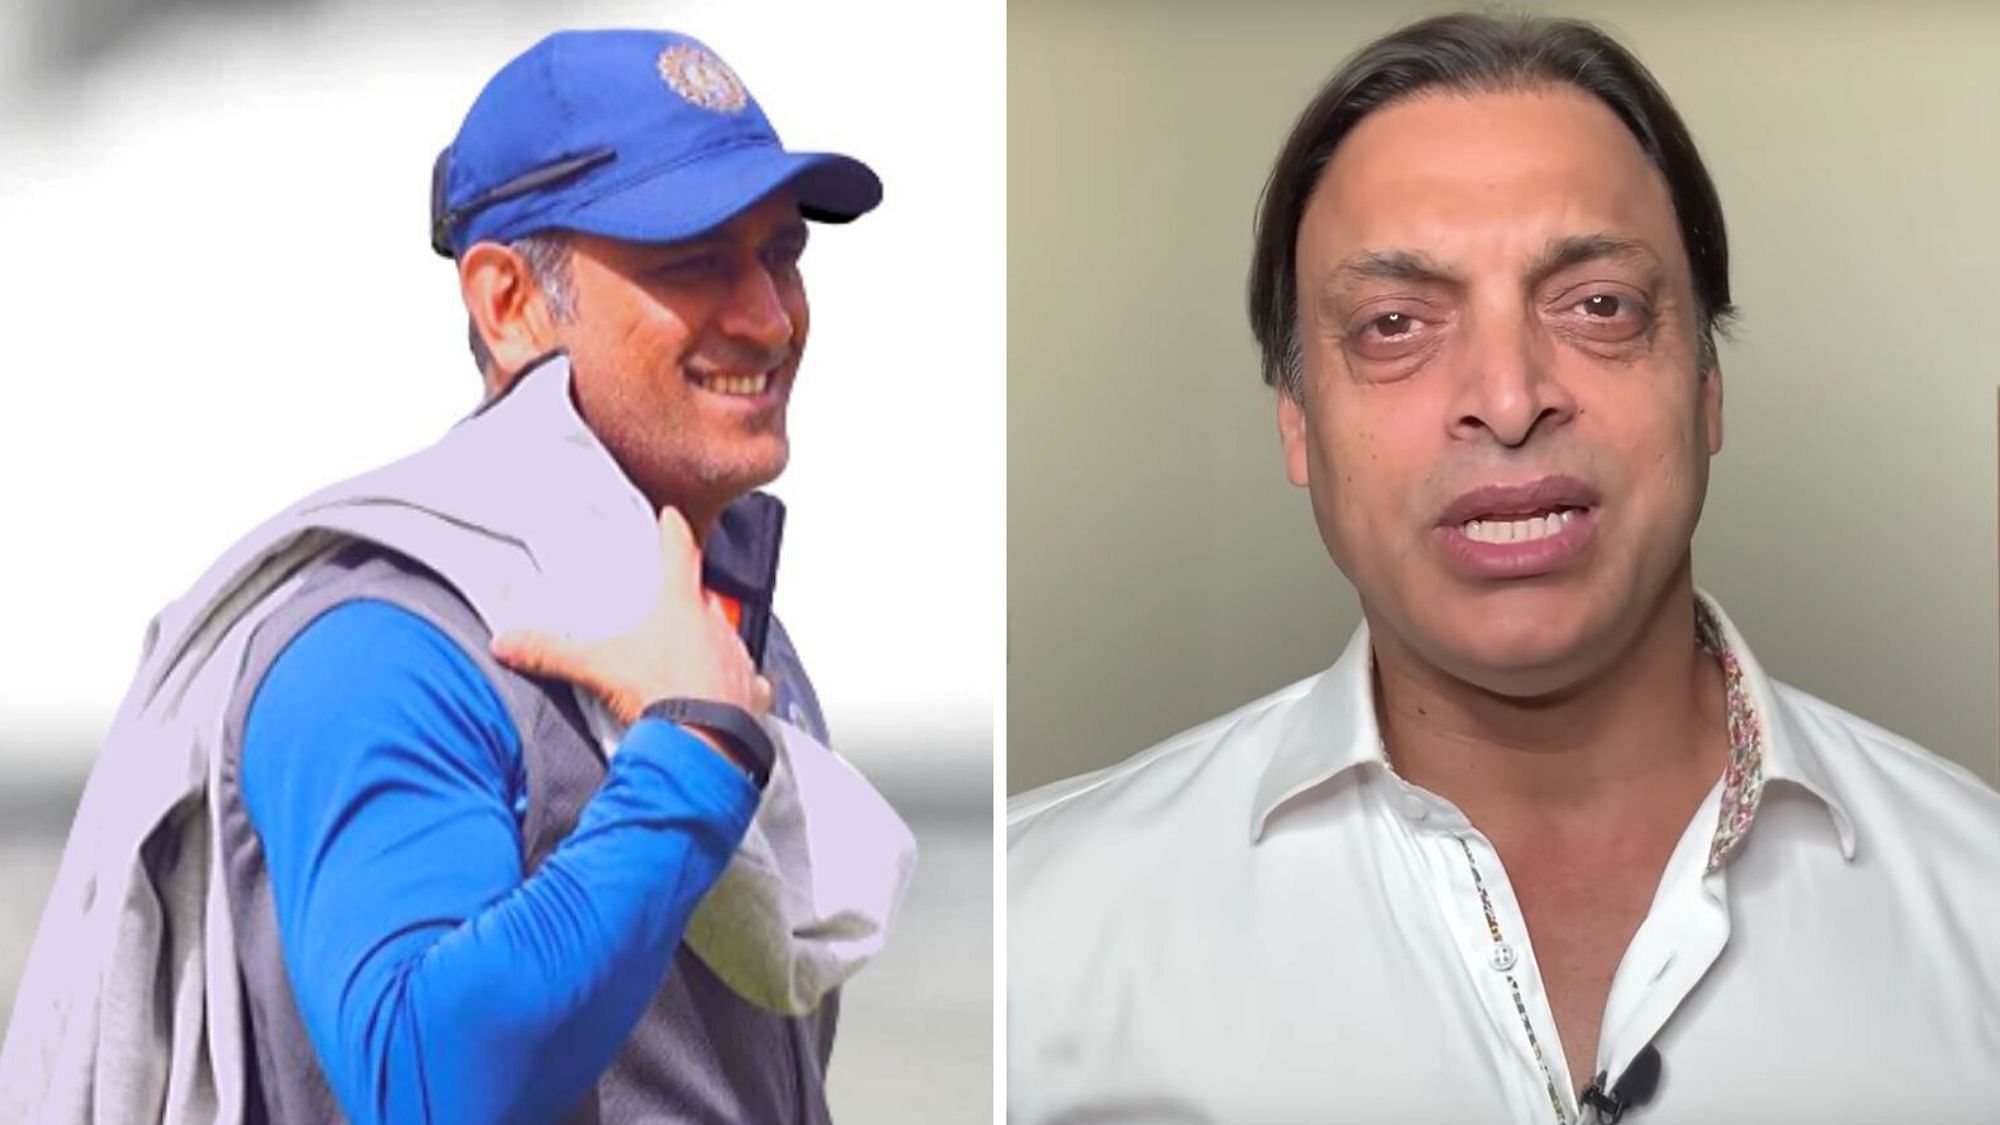 Shoaib Akhtar said he hopes MS Dhoni gets a resounding farewell despite his resolute silence on what the future holds.